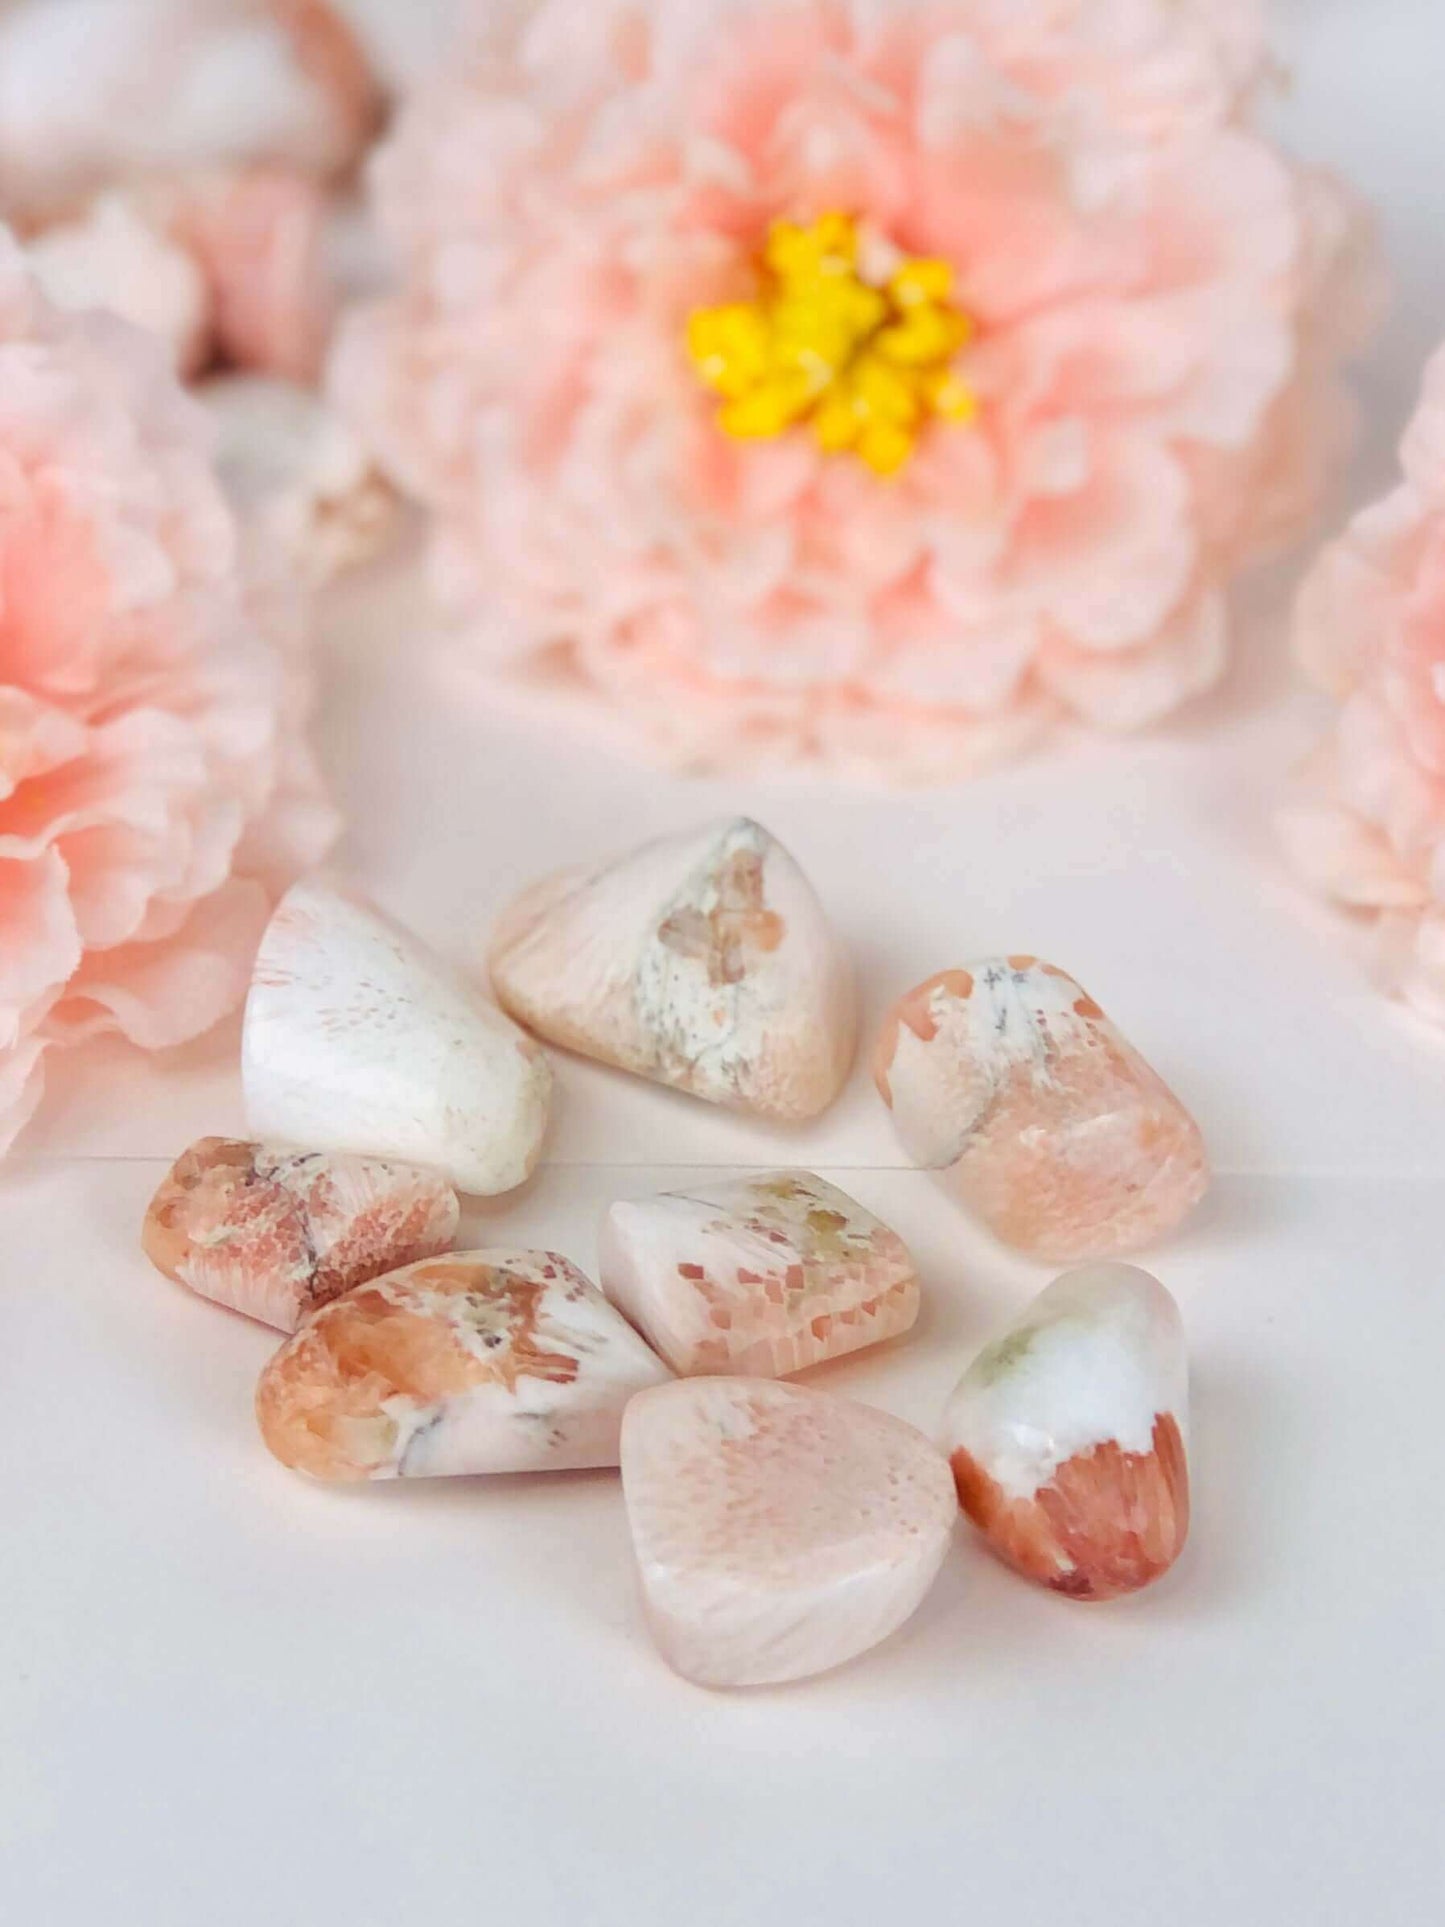 Pink / Peach Scolecite crystal , crystals for anxiety